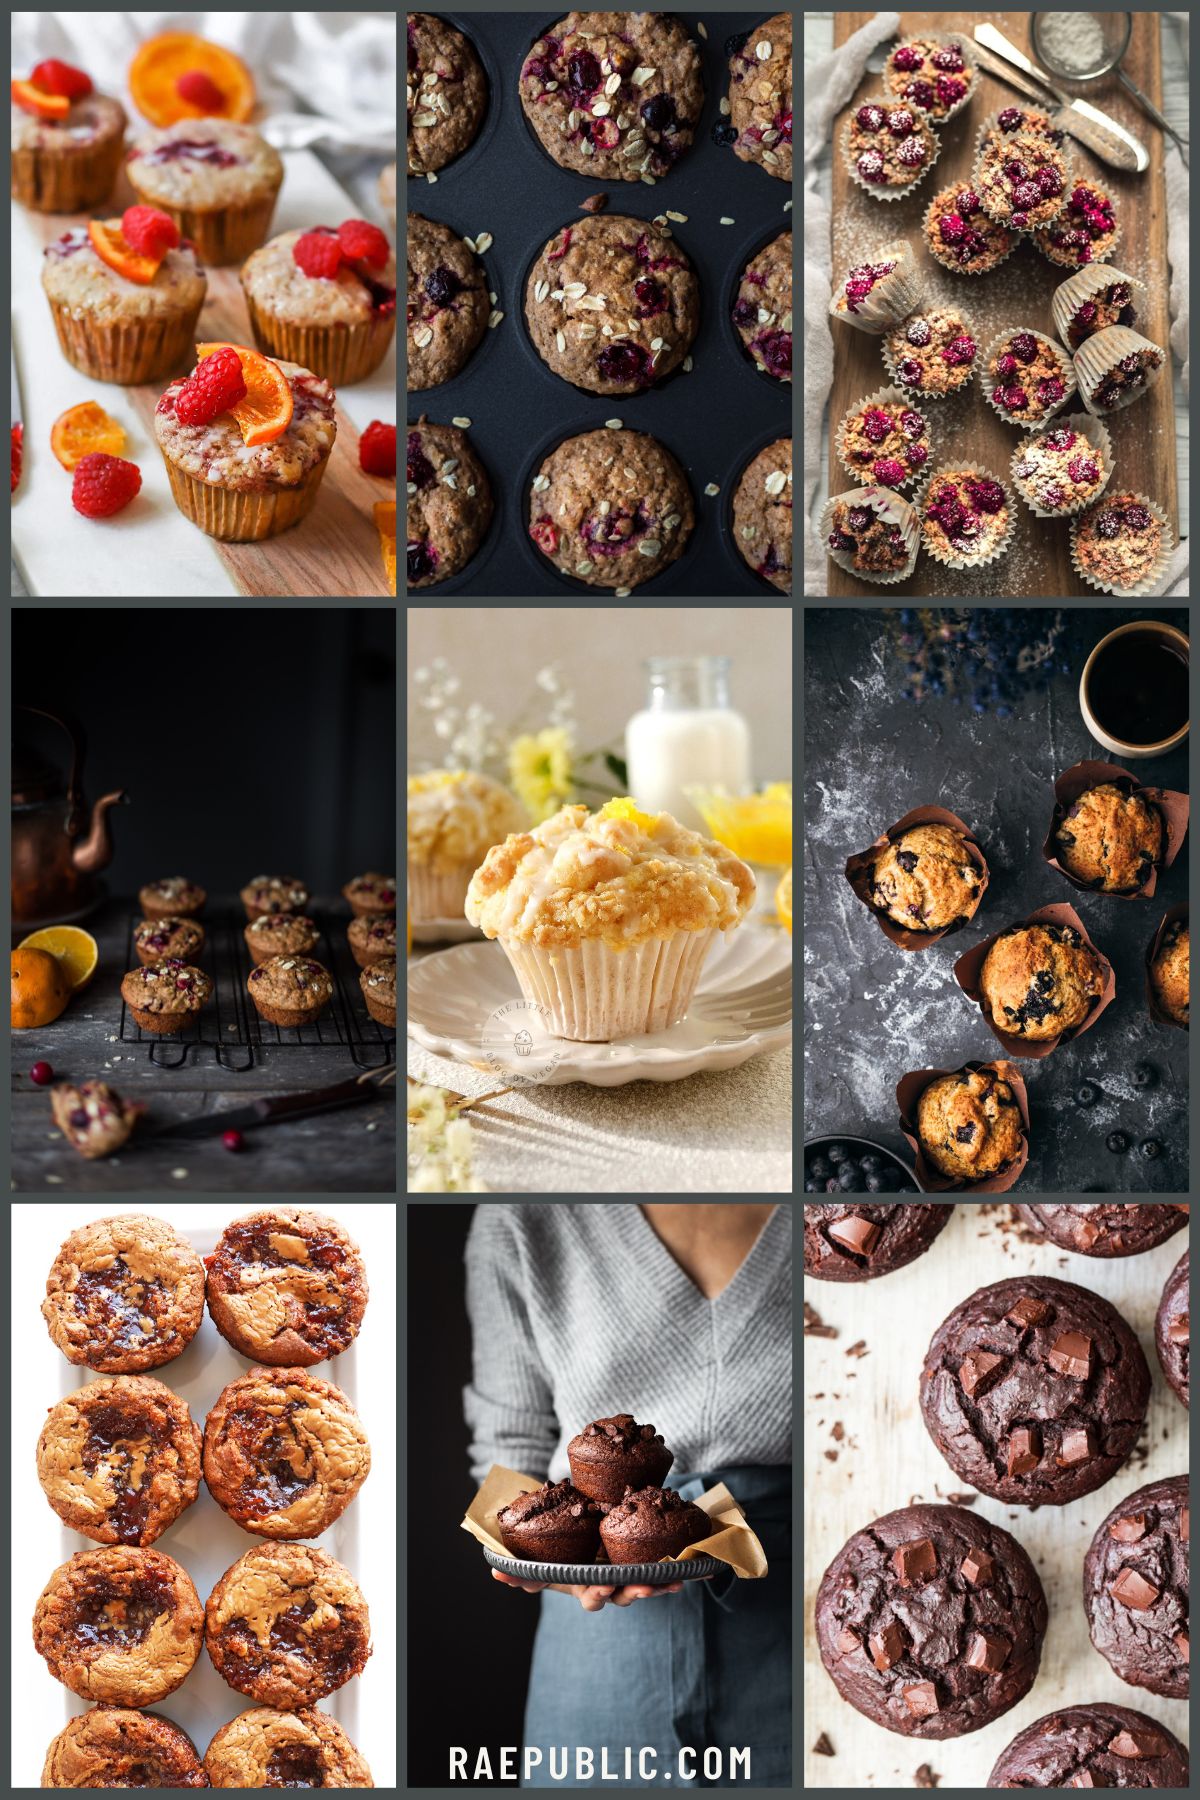 Collage of various vegan muffin recipes including blueberry, chocolate chip, and raspberry, displayed on different rustic surfaces.